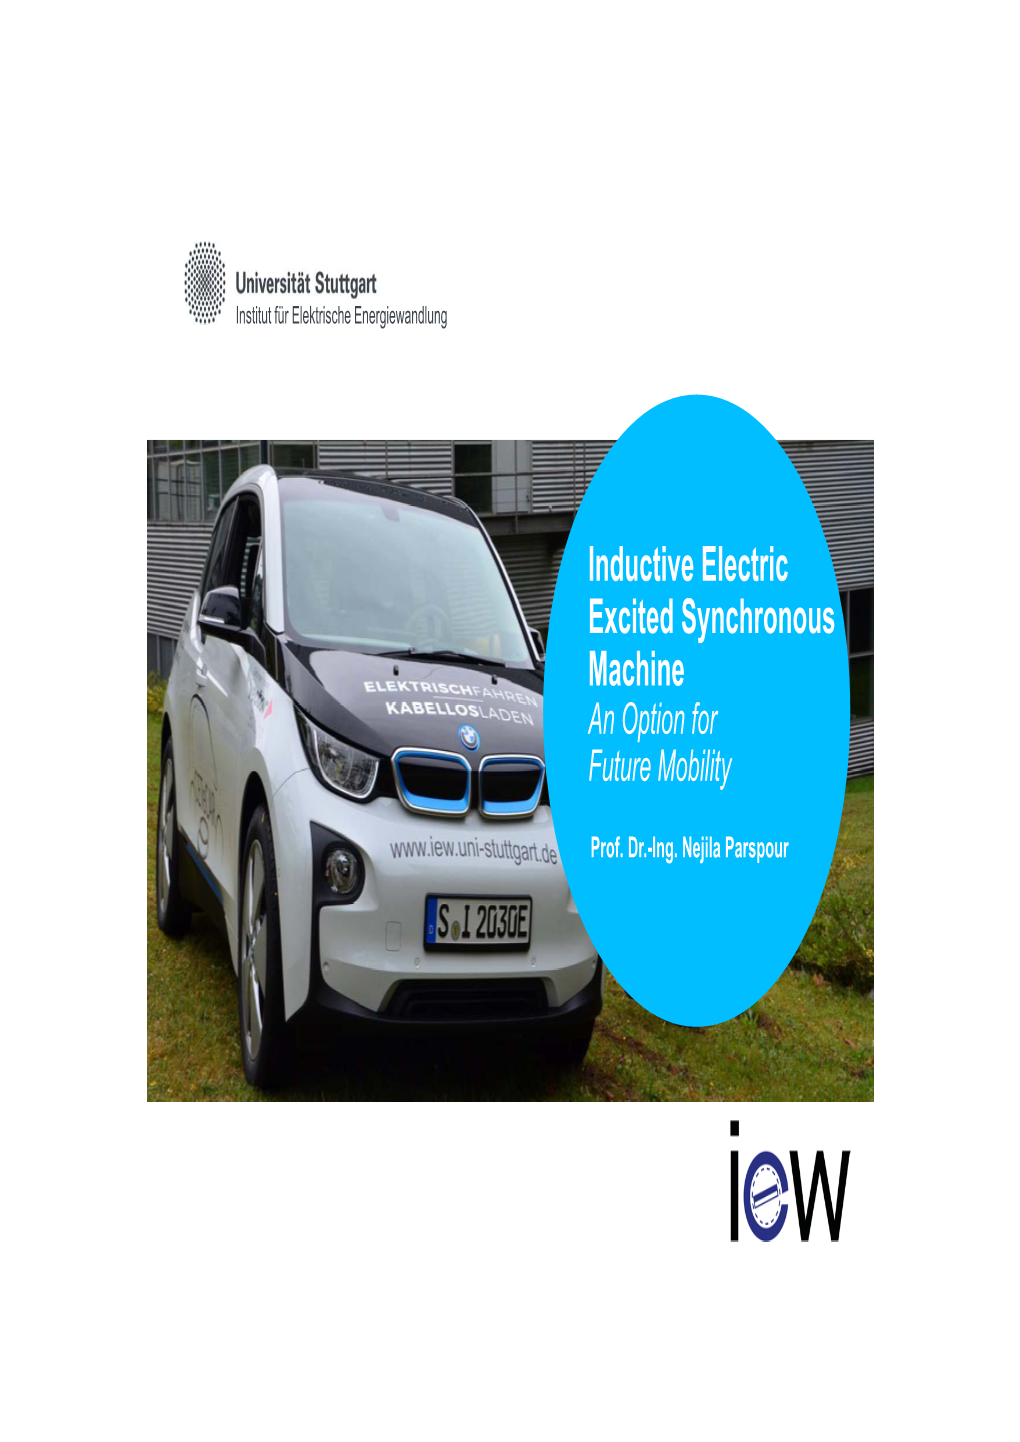 Inductive Electric Excited Synchronous Machine an Option for Future Mobility